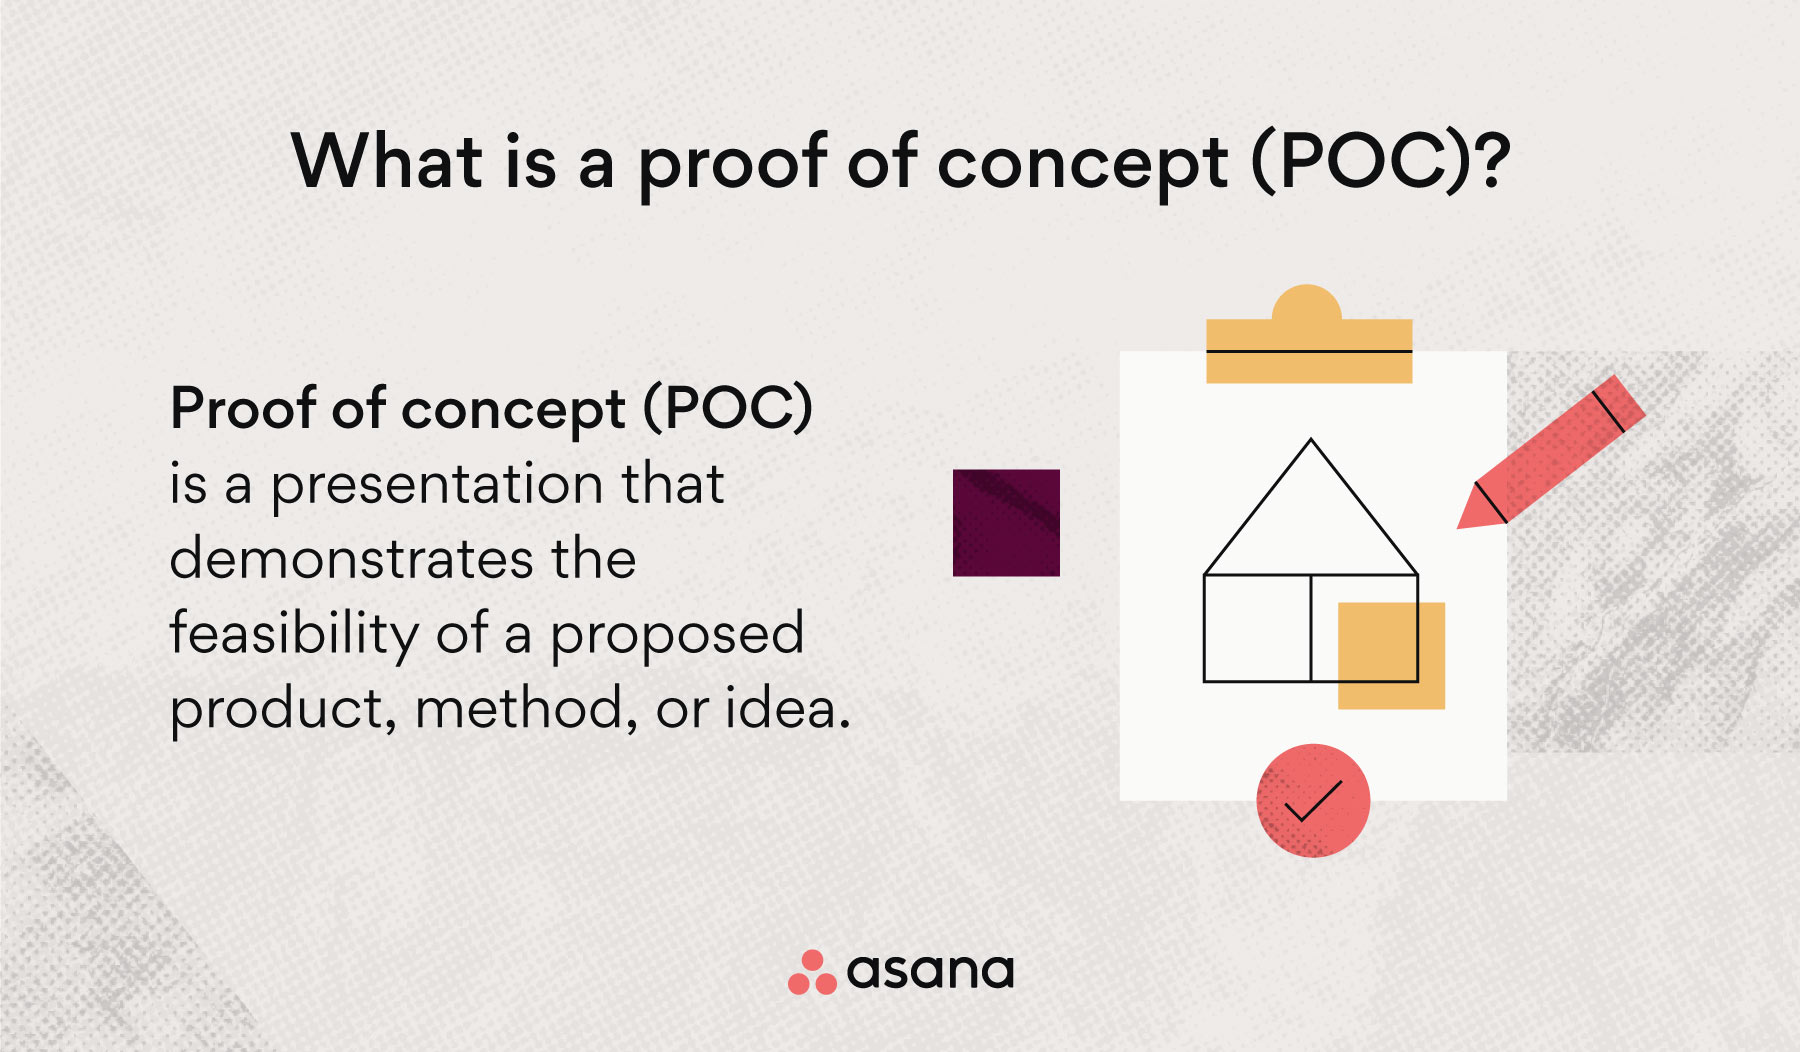 [inline illustration] what is proof of concept (POC)? (infographic)